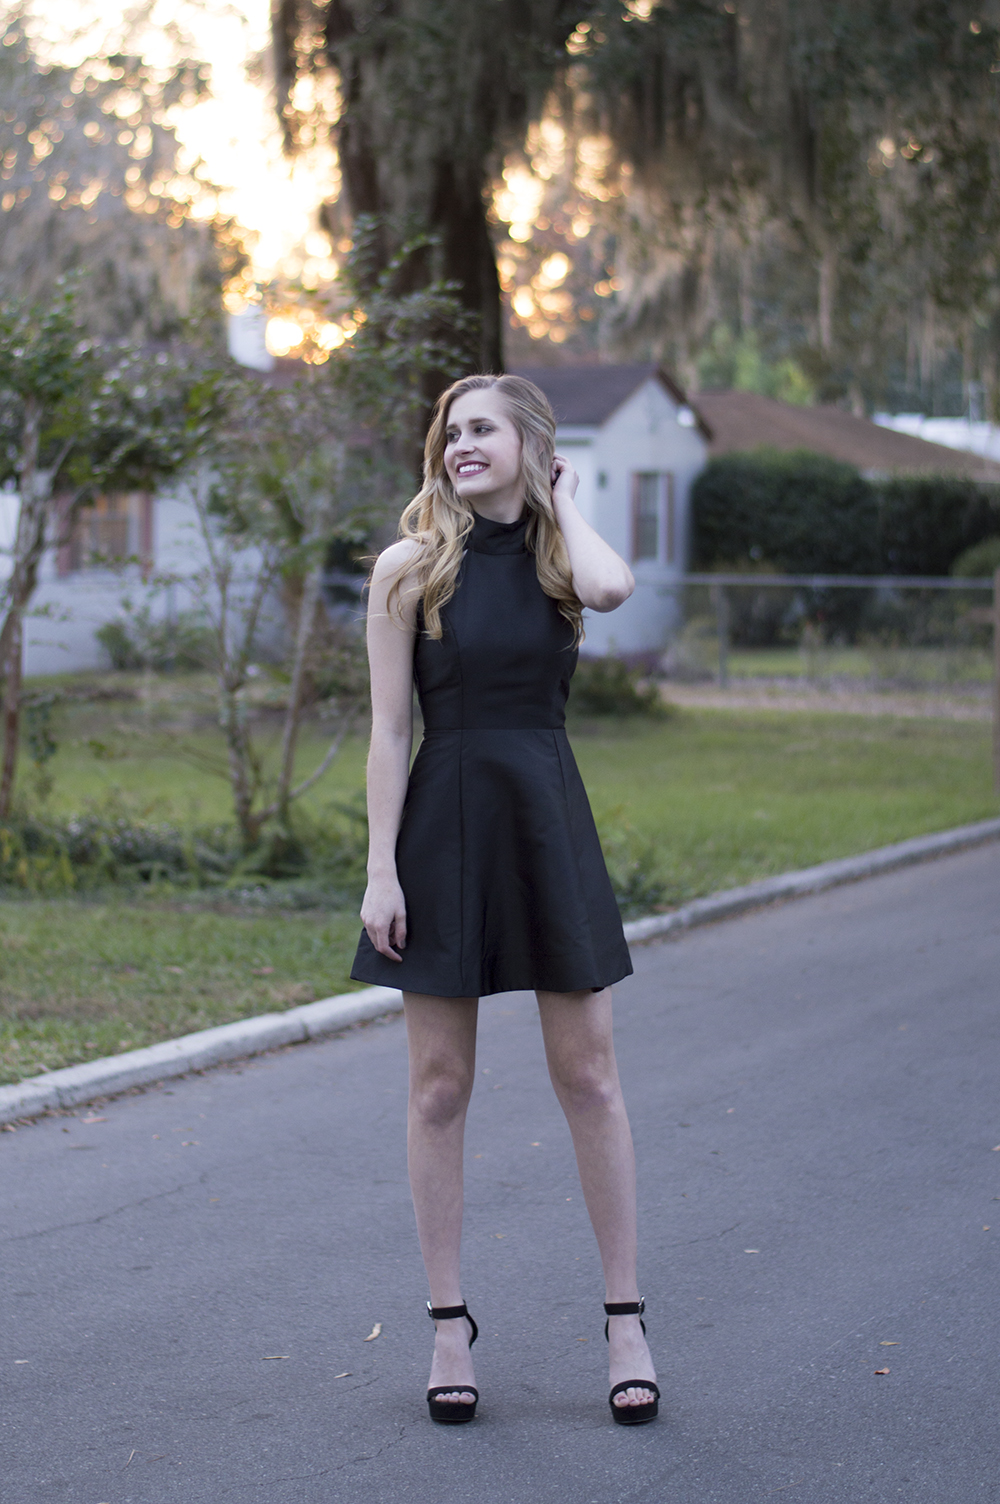 styelled-blog-fashion-blogger-style-fall-trends-winter-little-black-dress-forever-21-blonde-sweater-weather-02